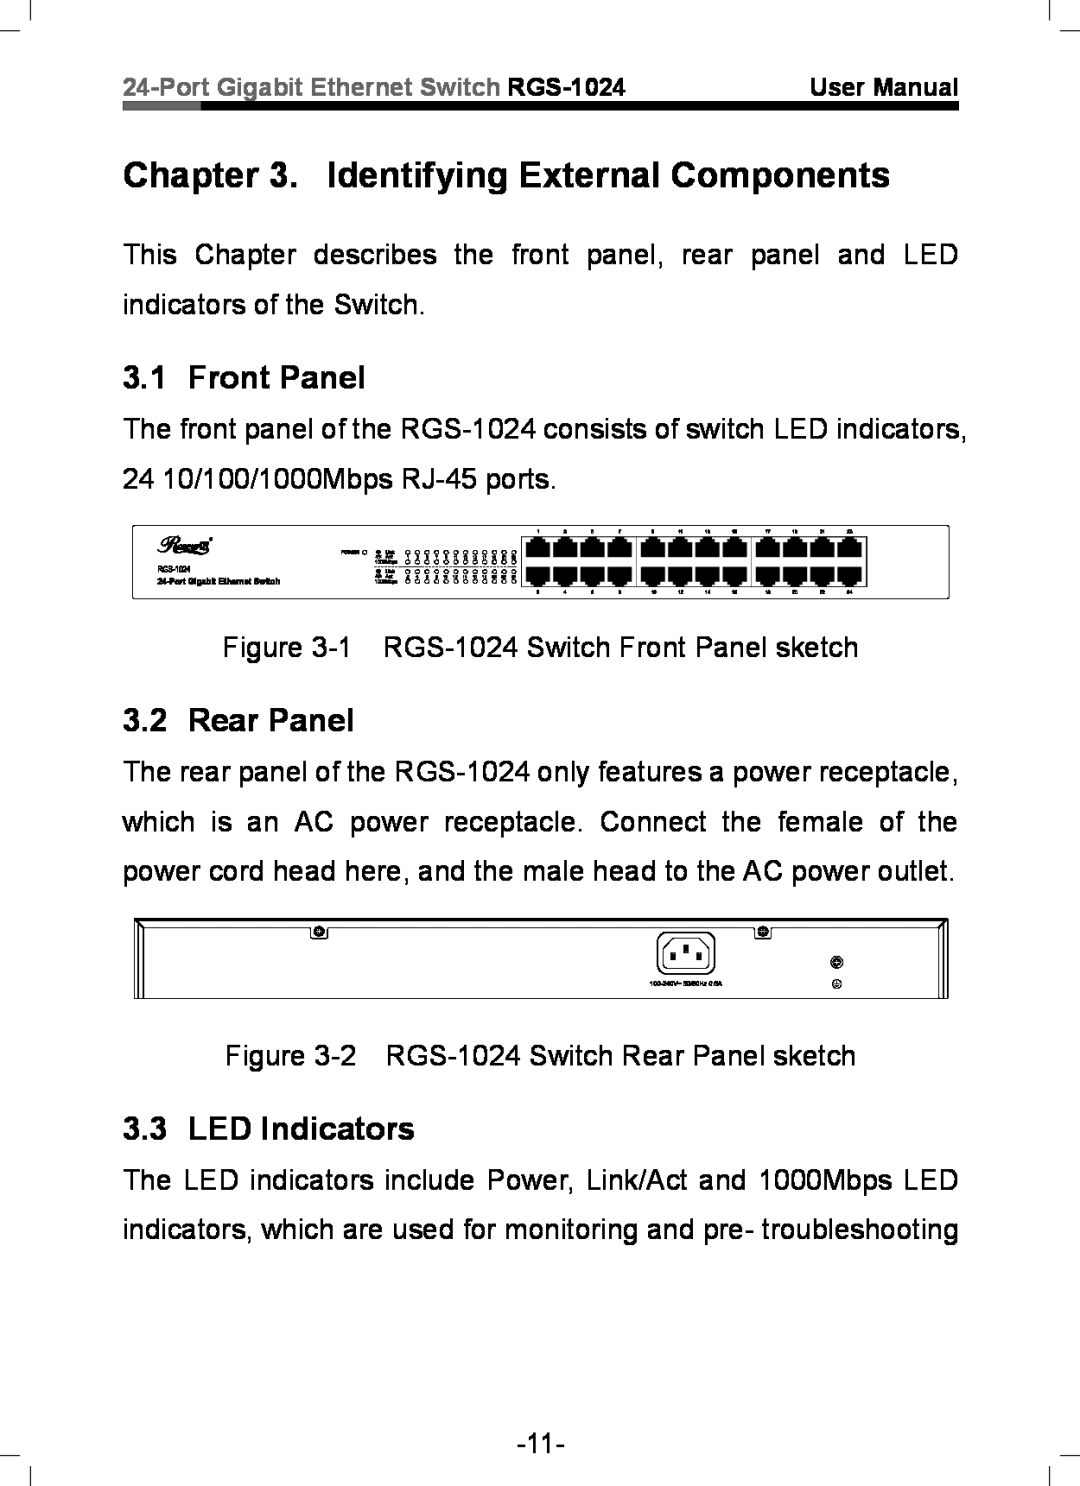 Rosewill RGS-1024 user manual Identifying External Components, Front Panel, Rear Panel, LED Indicators 